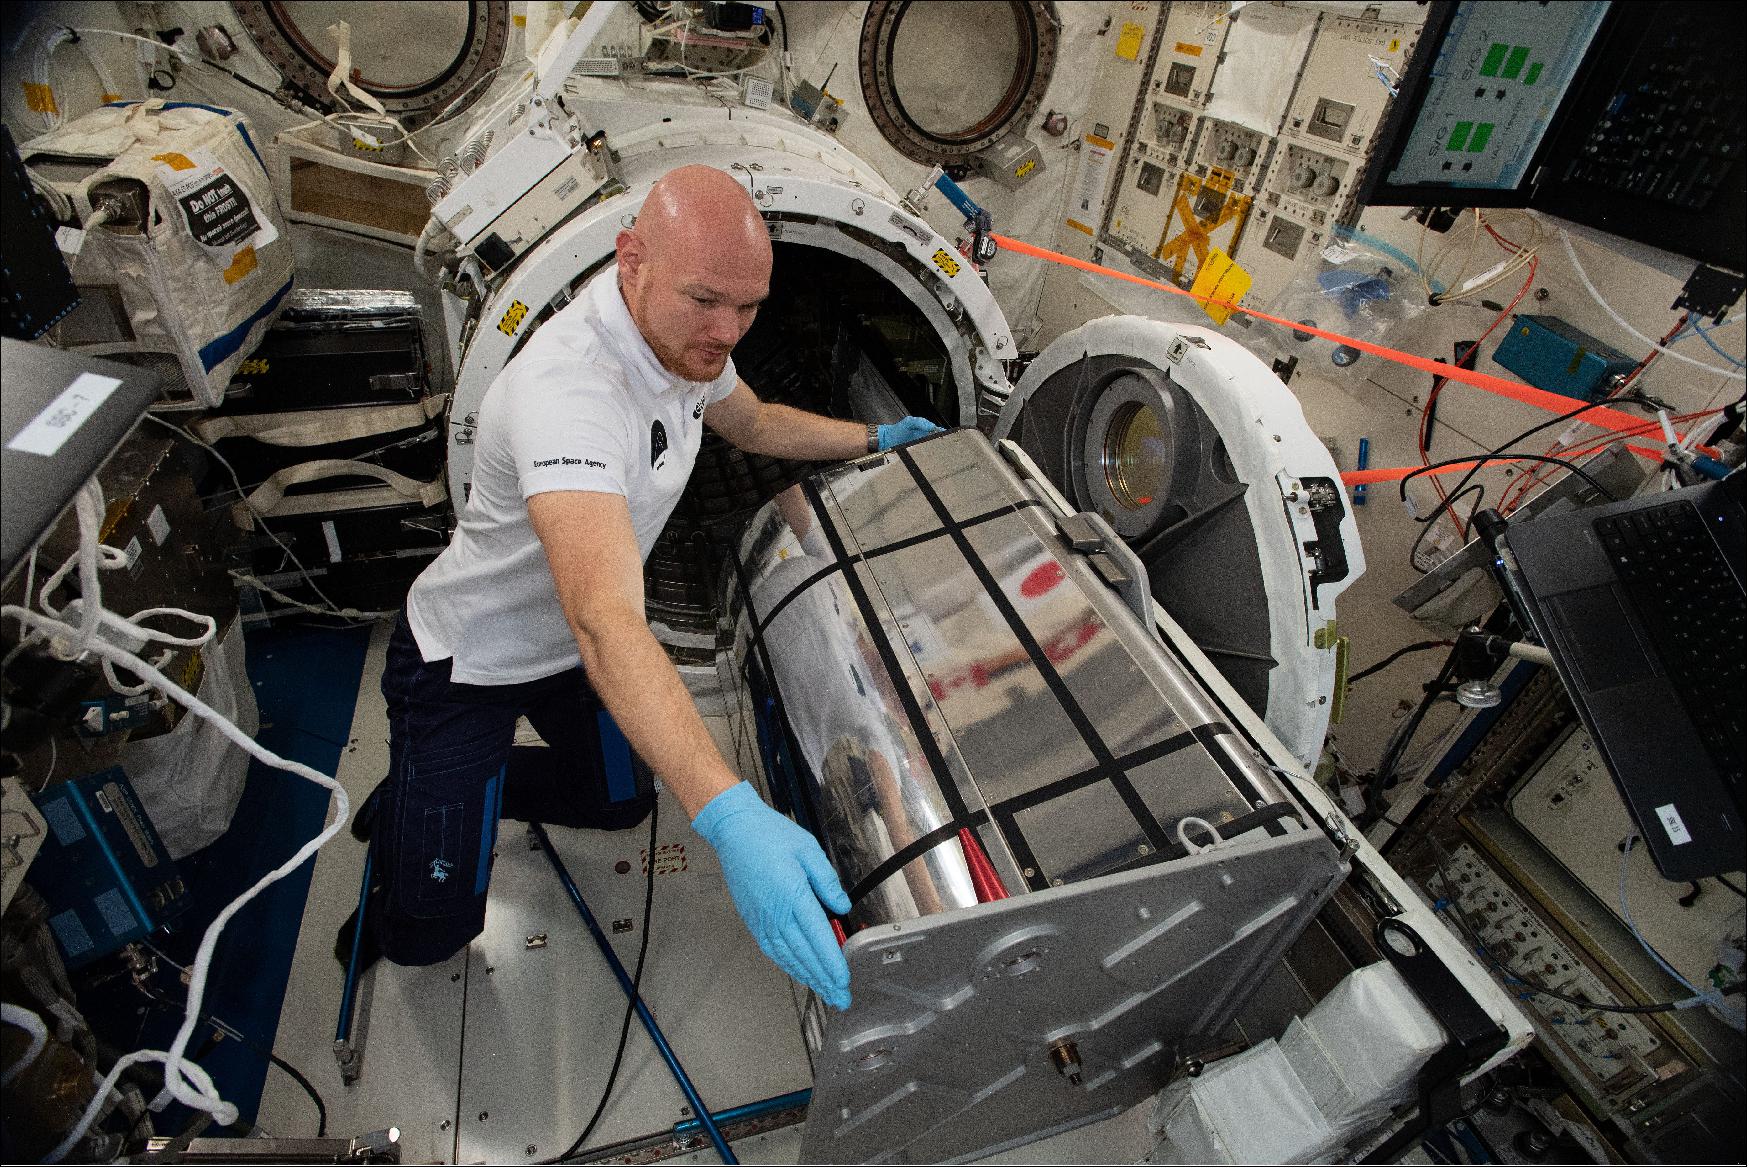 Figure 81: ESA astronaut Alexander Gerst preparing the DESIS instrument for installation aboard the space station. The DESIS instrument works by measuring hyperspectral reflections from Earth's surface which contributes to resource management, ecosystem health monitoring and urban development (image credit: NASA)